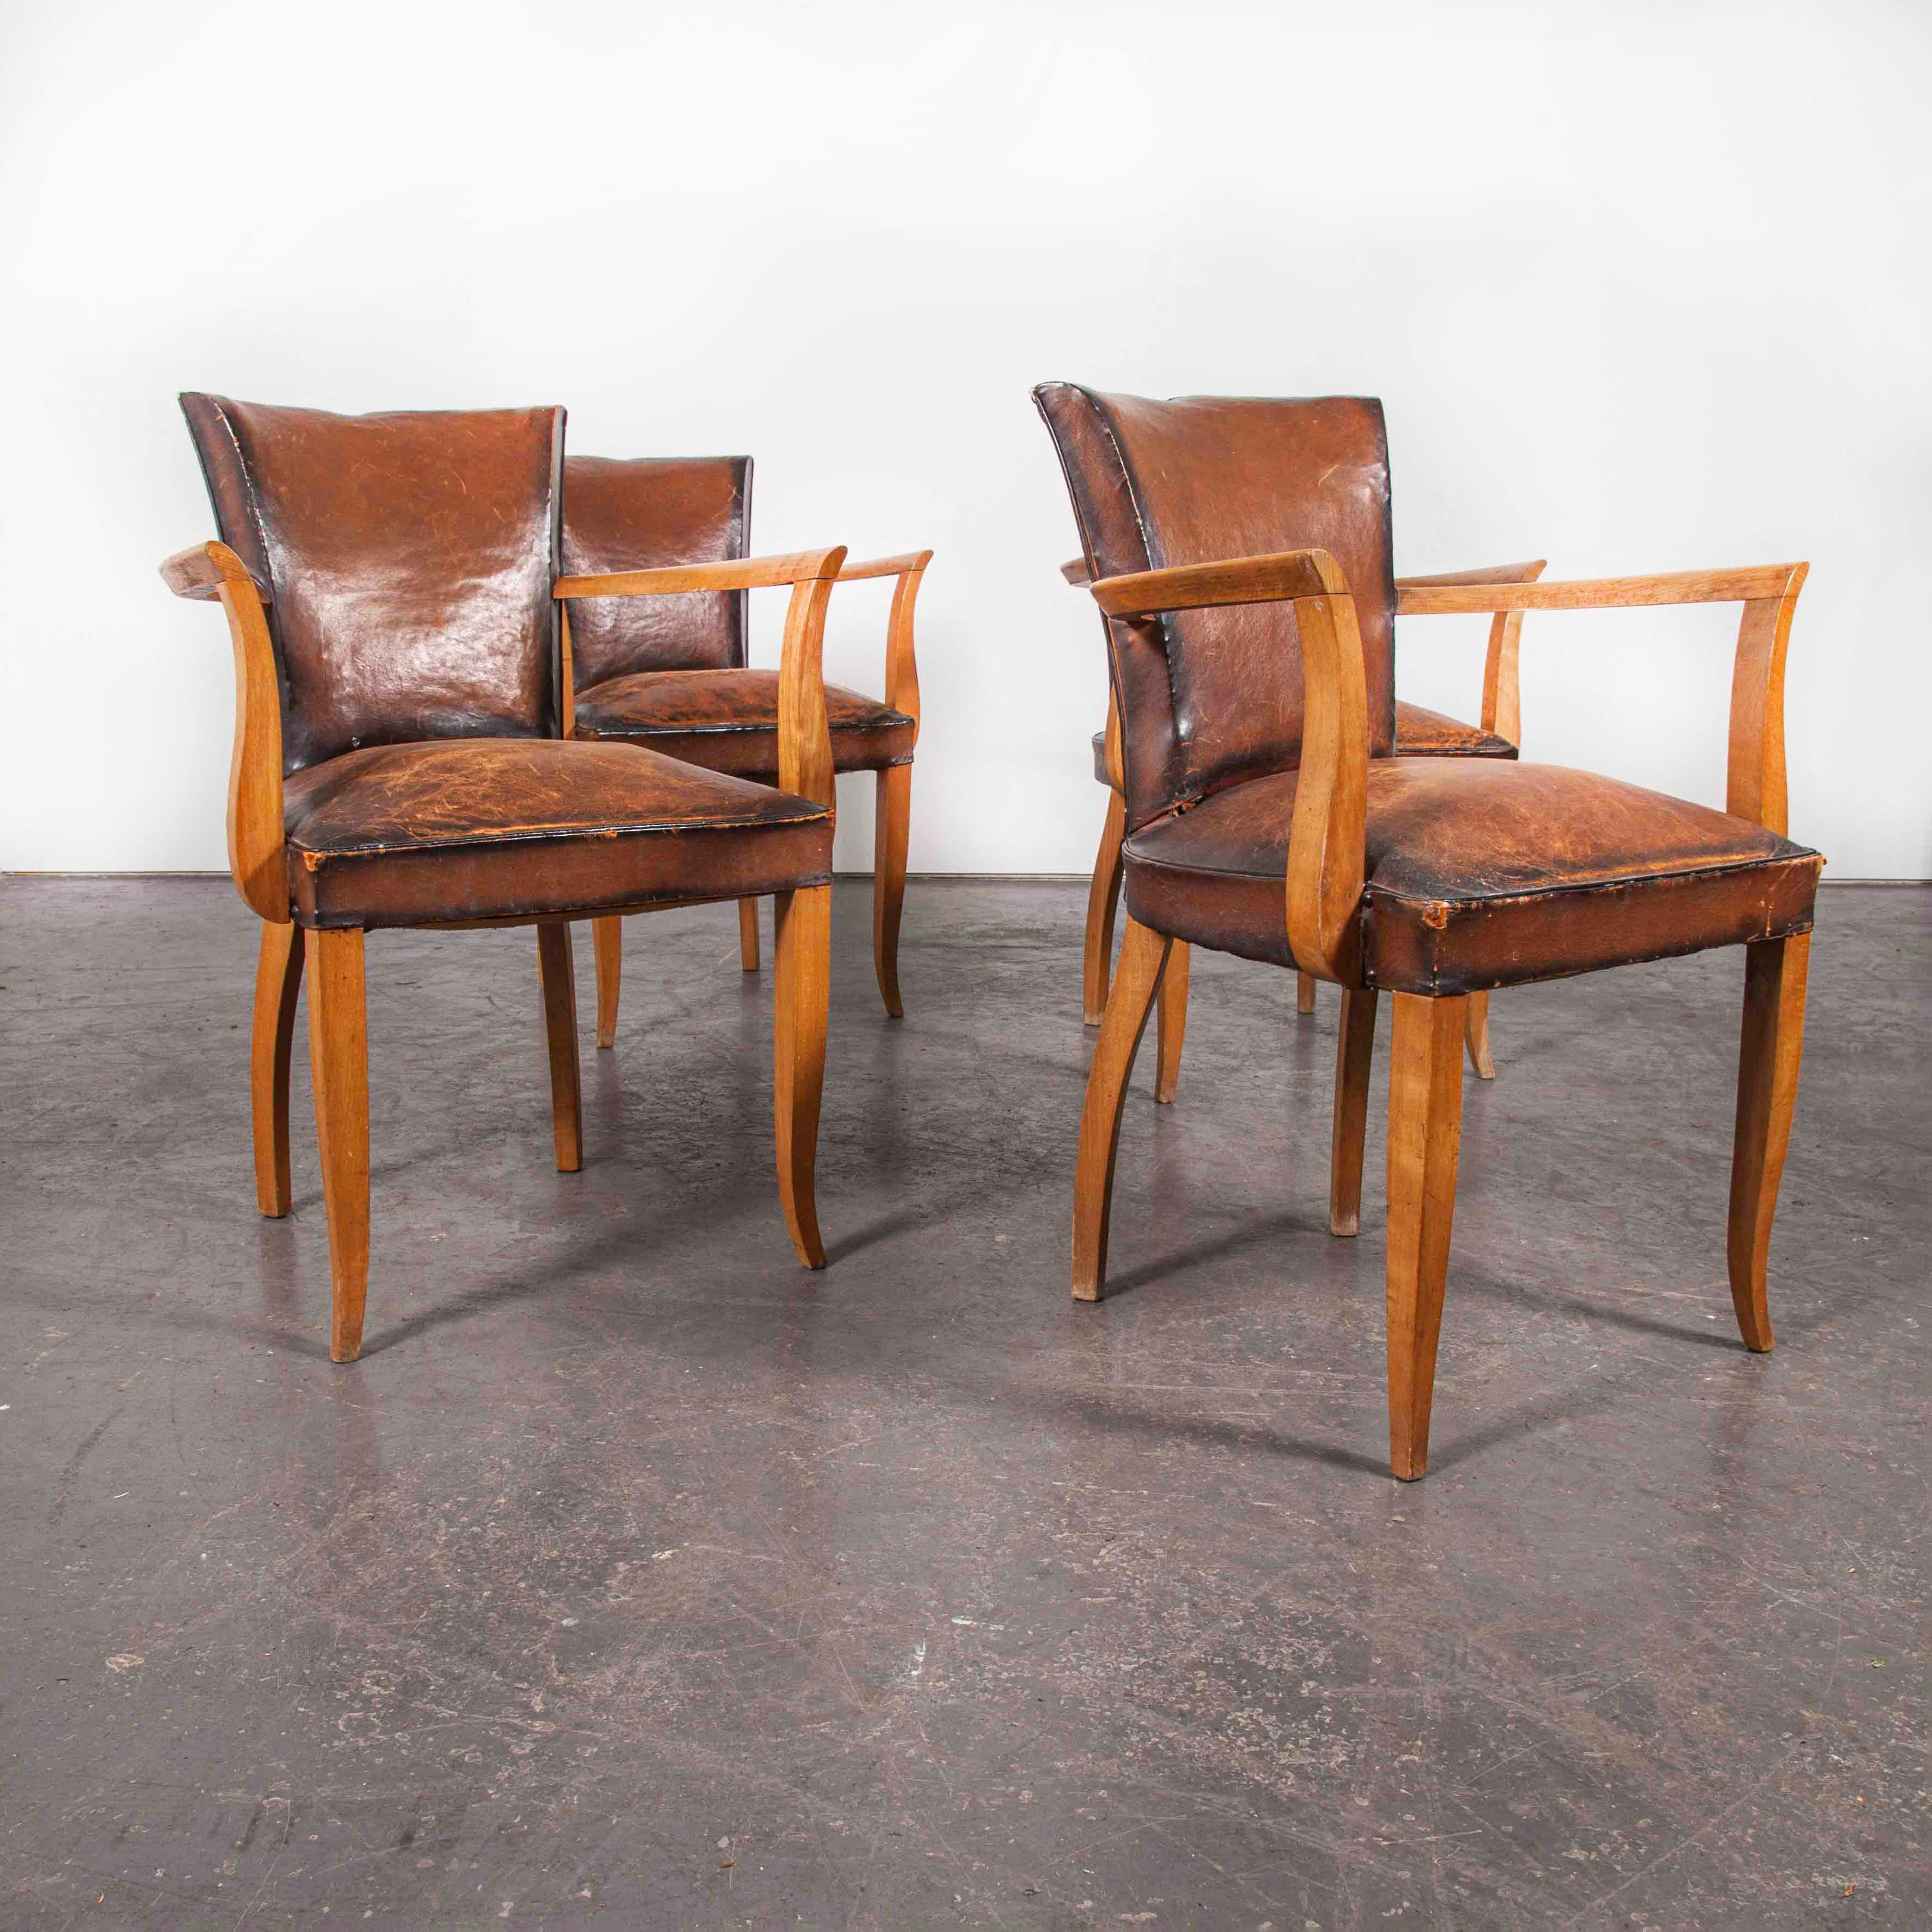 1930s chairs